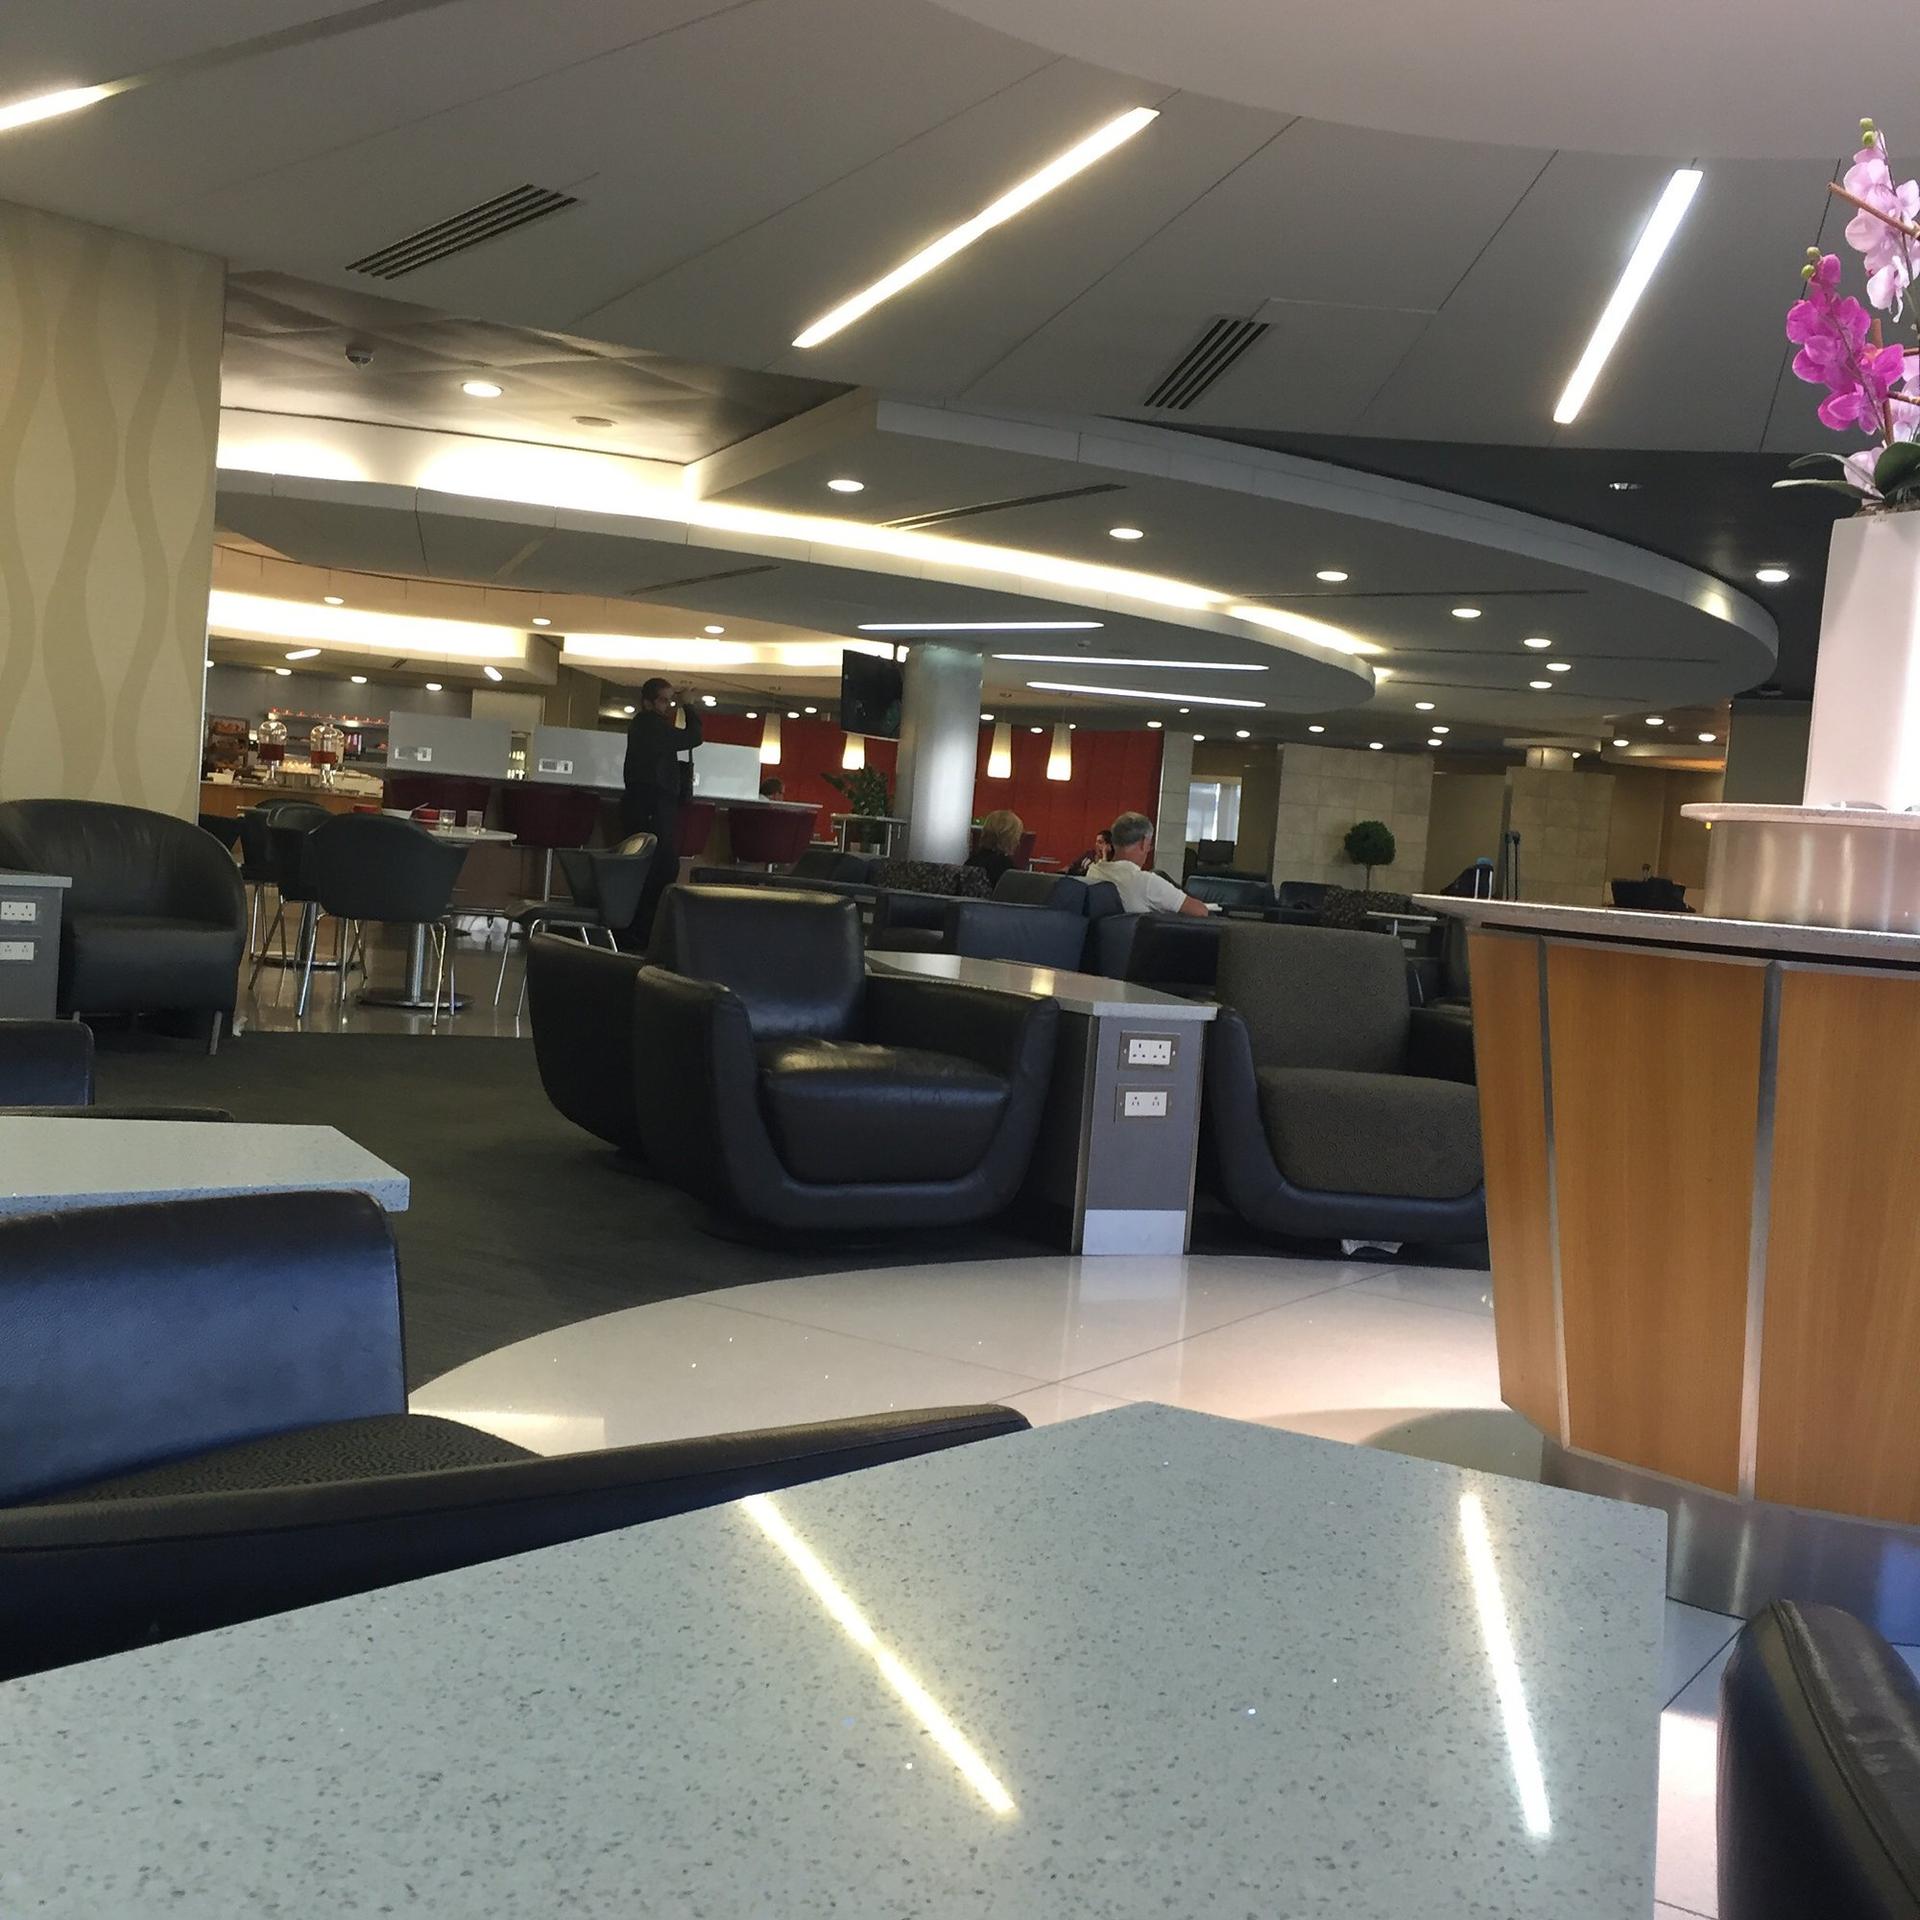 American Airlines Admirals Club image 38 of 38